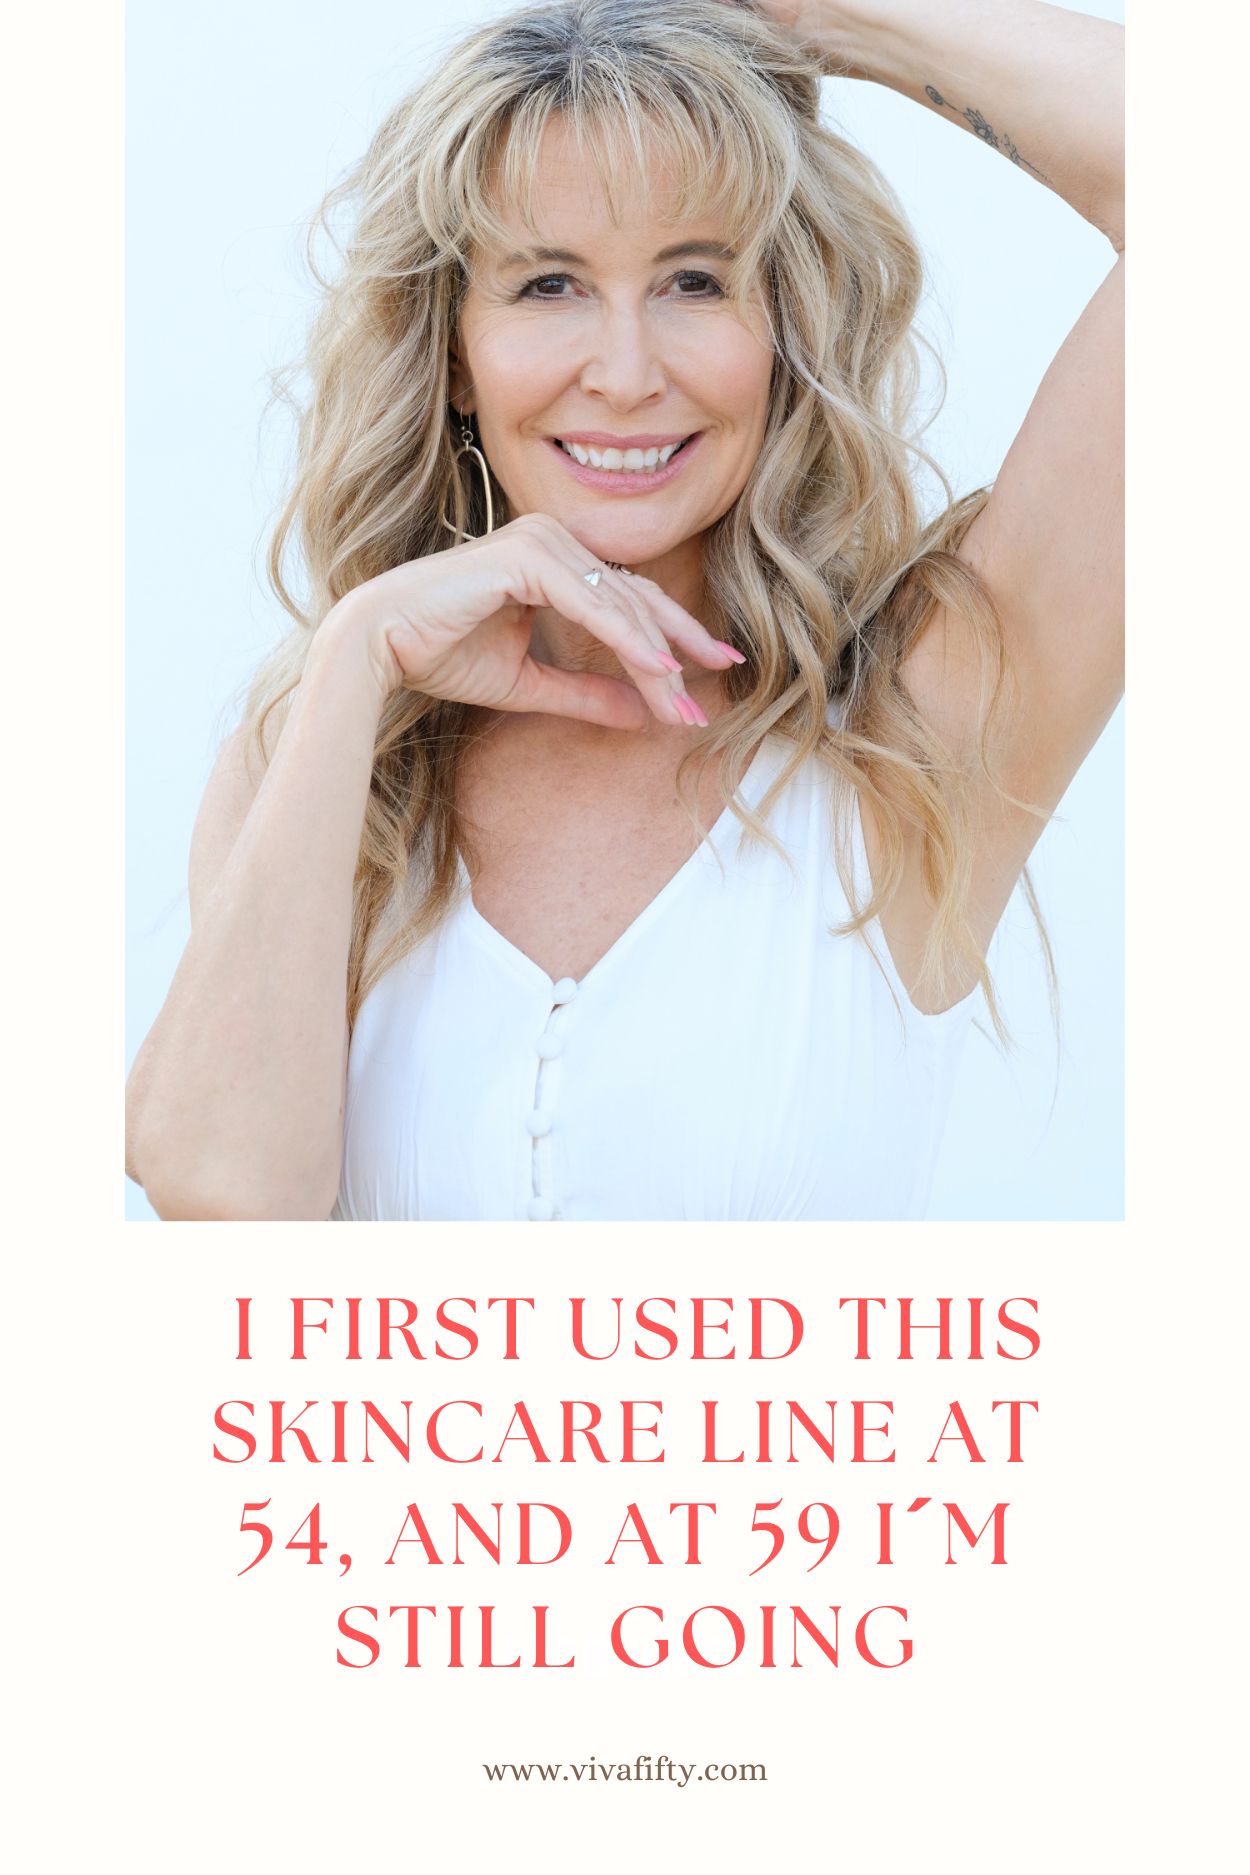 I first tried FRÉ skincare in 2017, and in 2023 I am reaping the benefits of their full line of products that now include serums and tinted moisturizers.